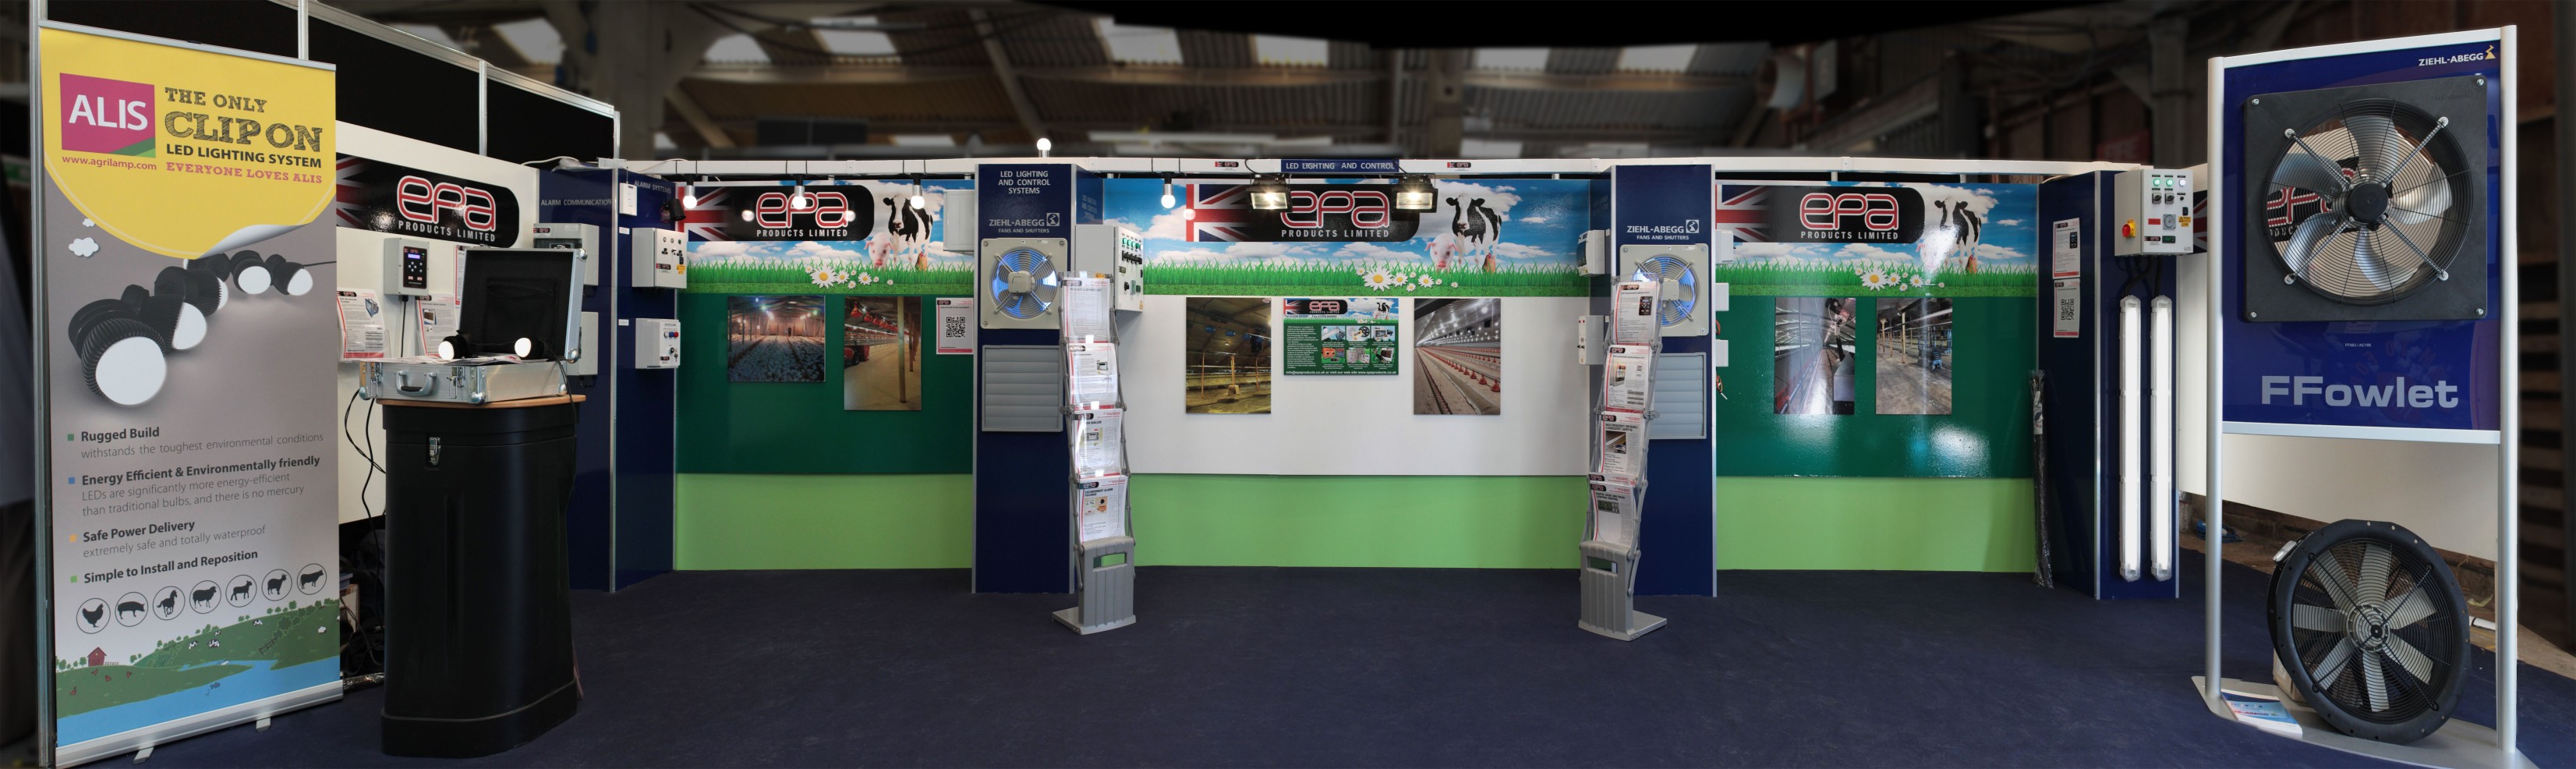 EPA Pig and Poultry Fair Showstand 2014